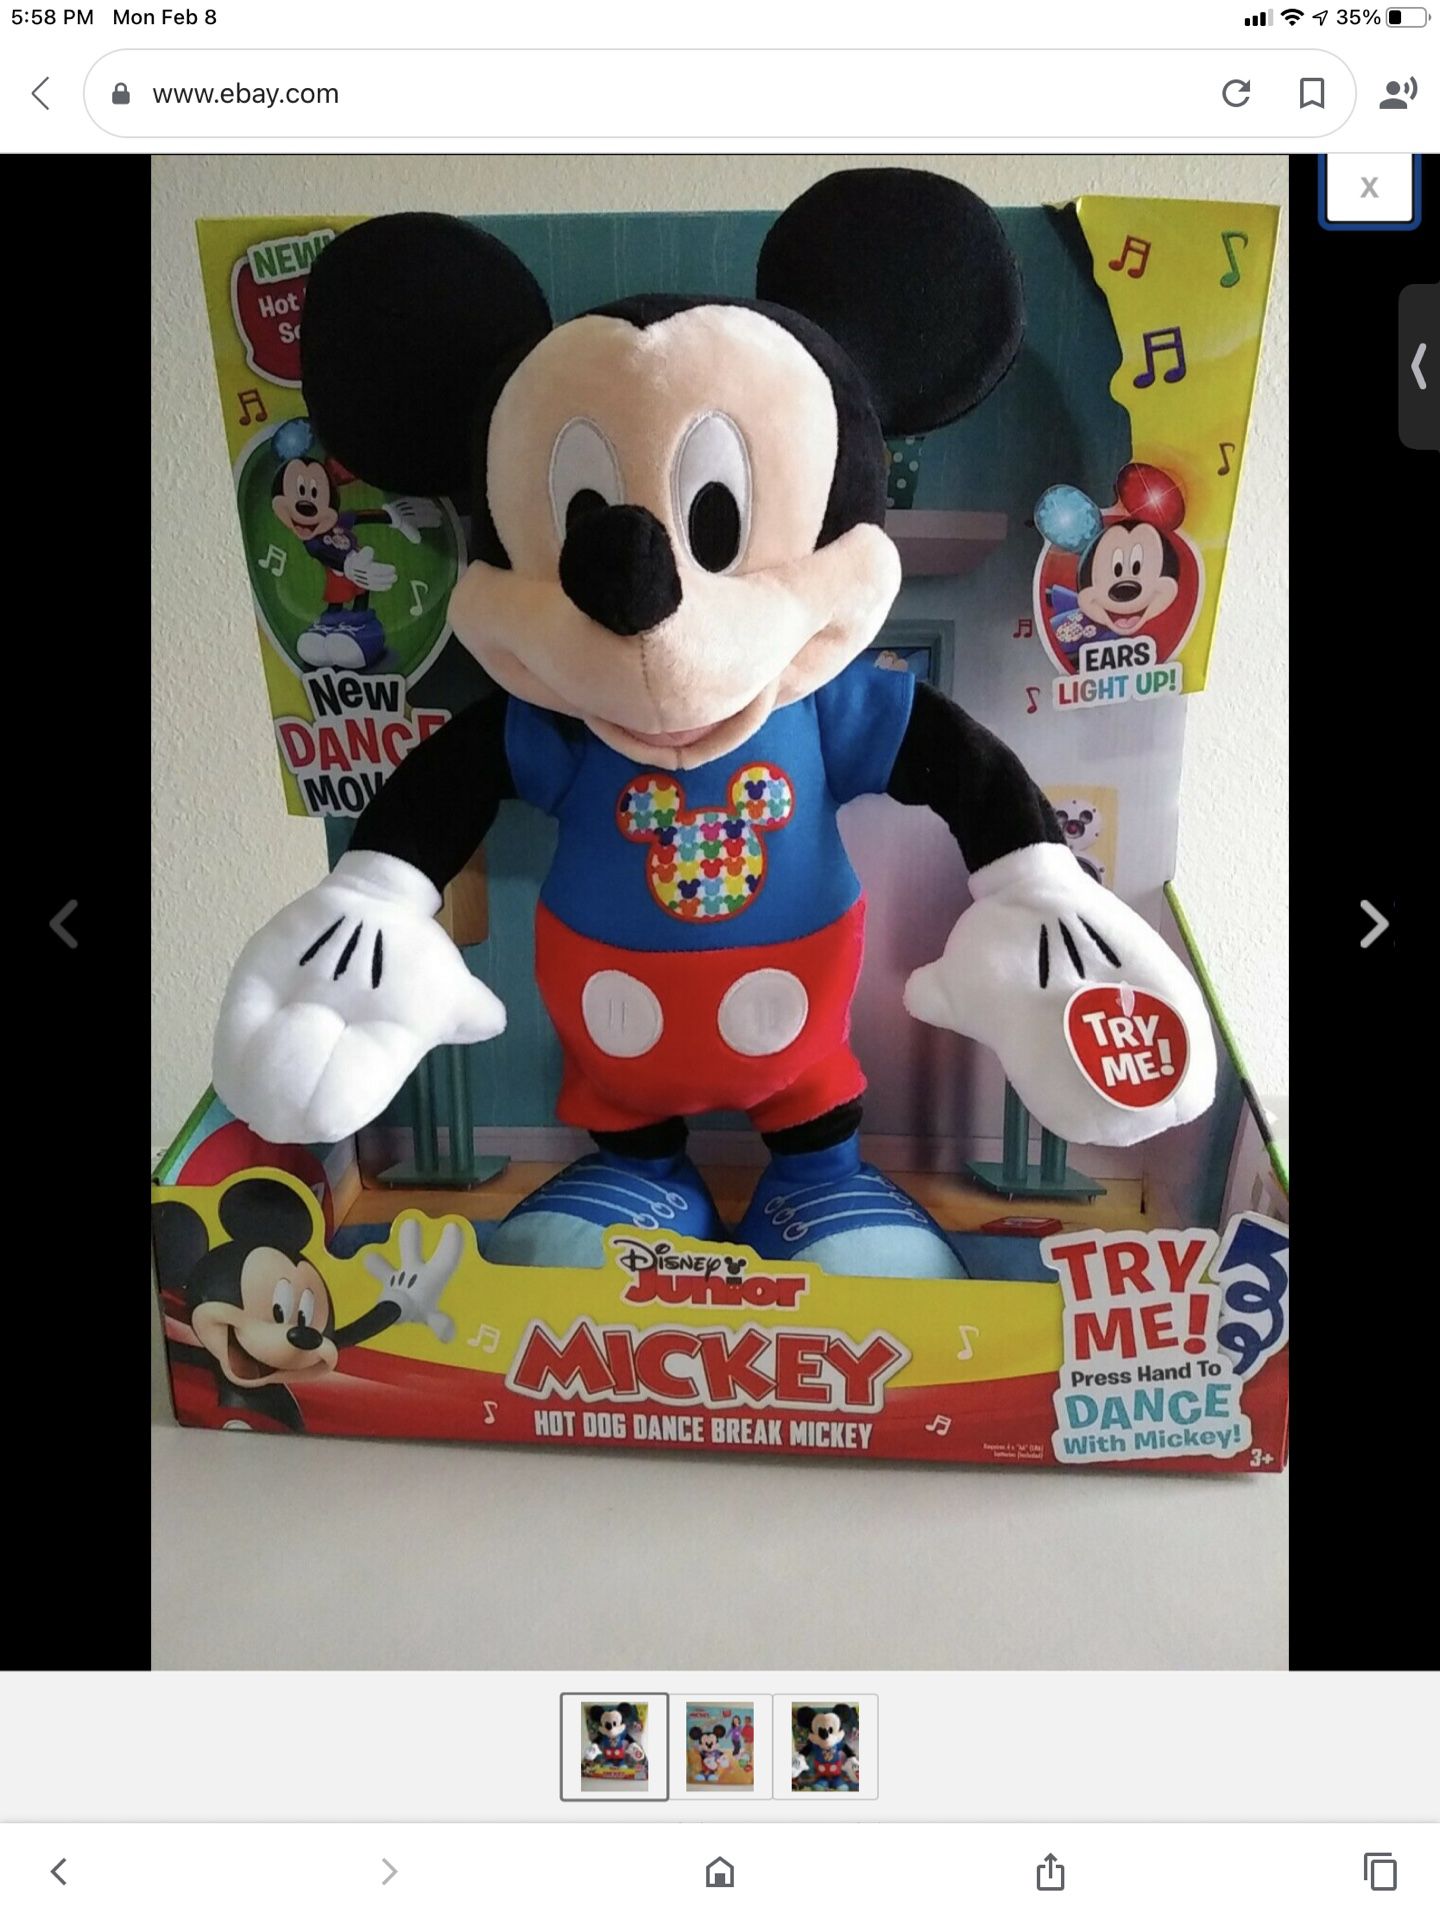 Mickey Mouse Hot Dog Dance